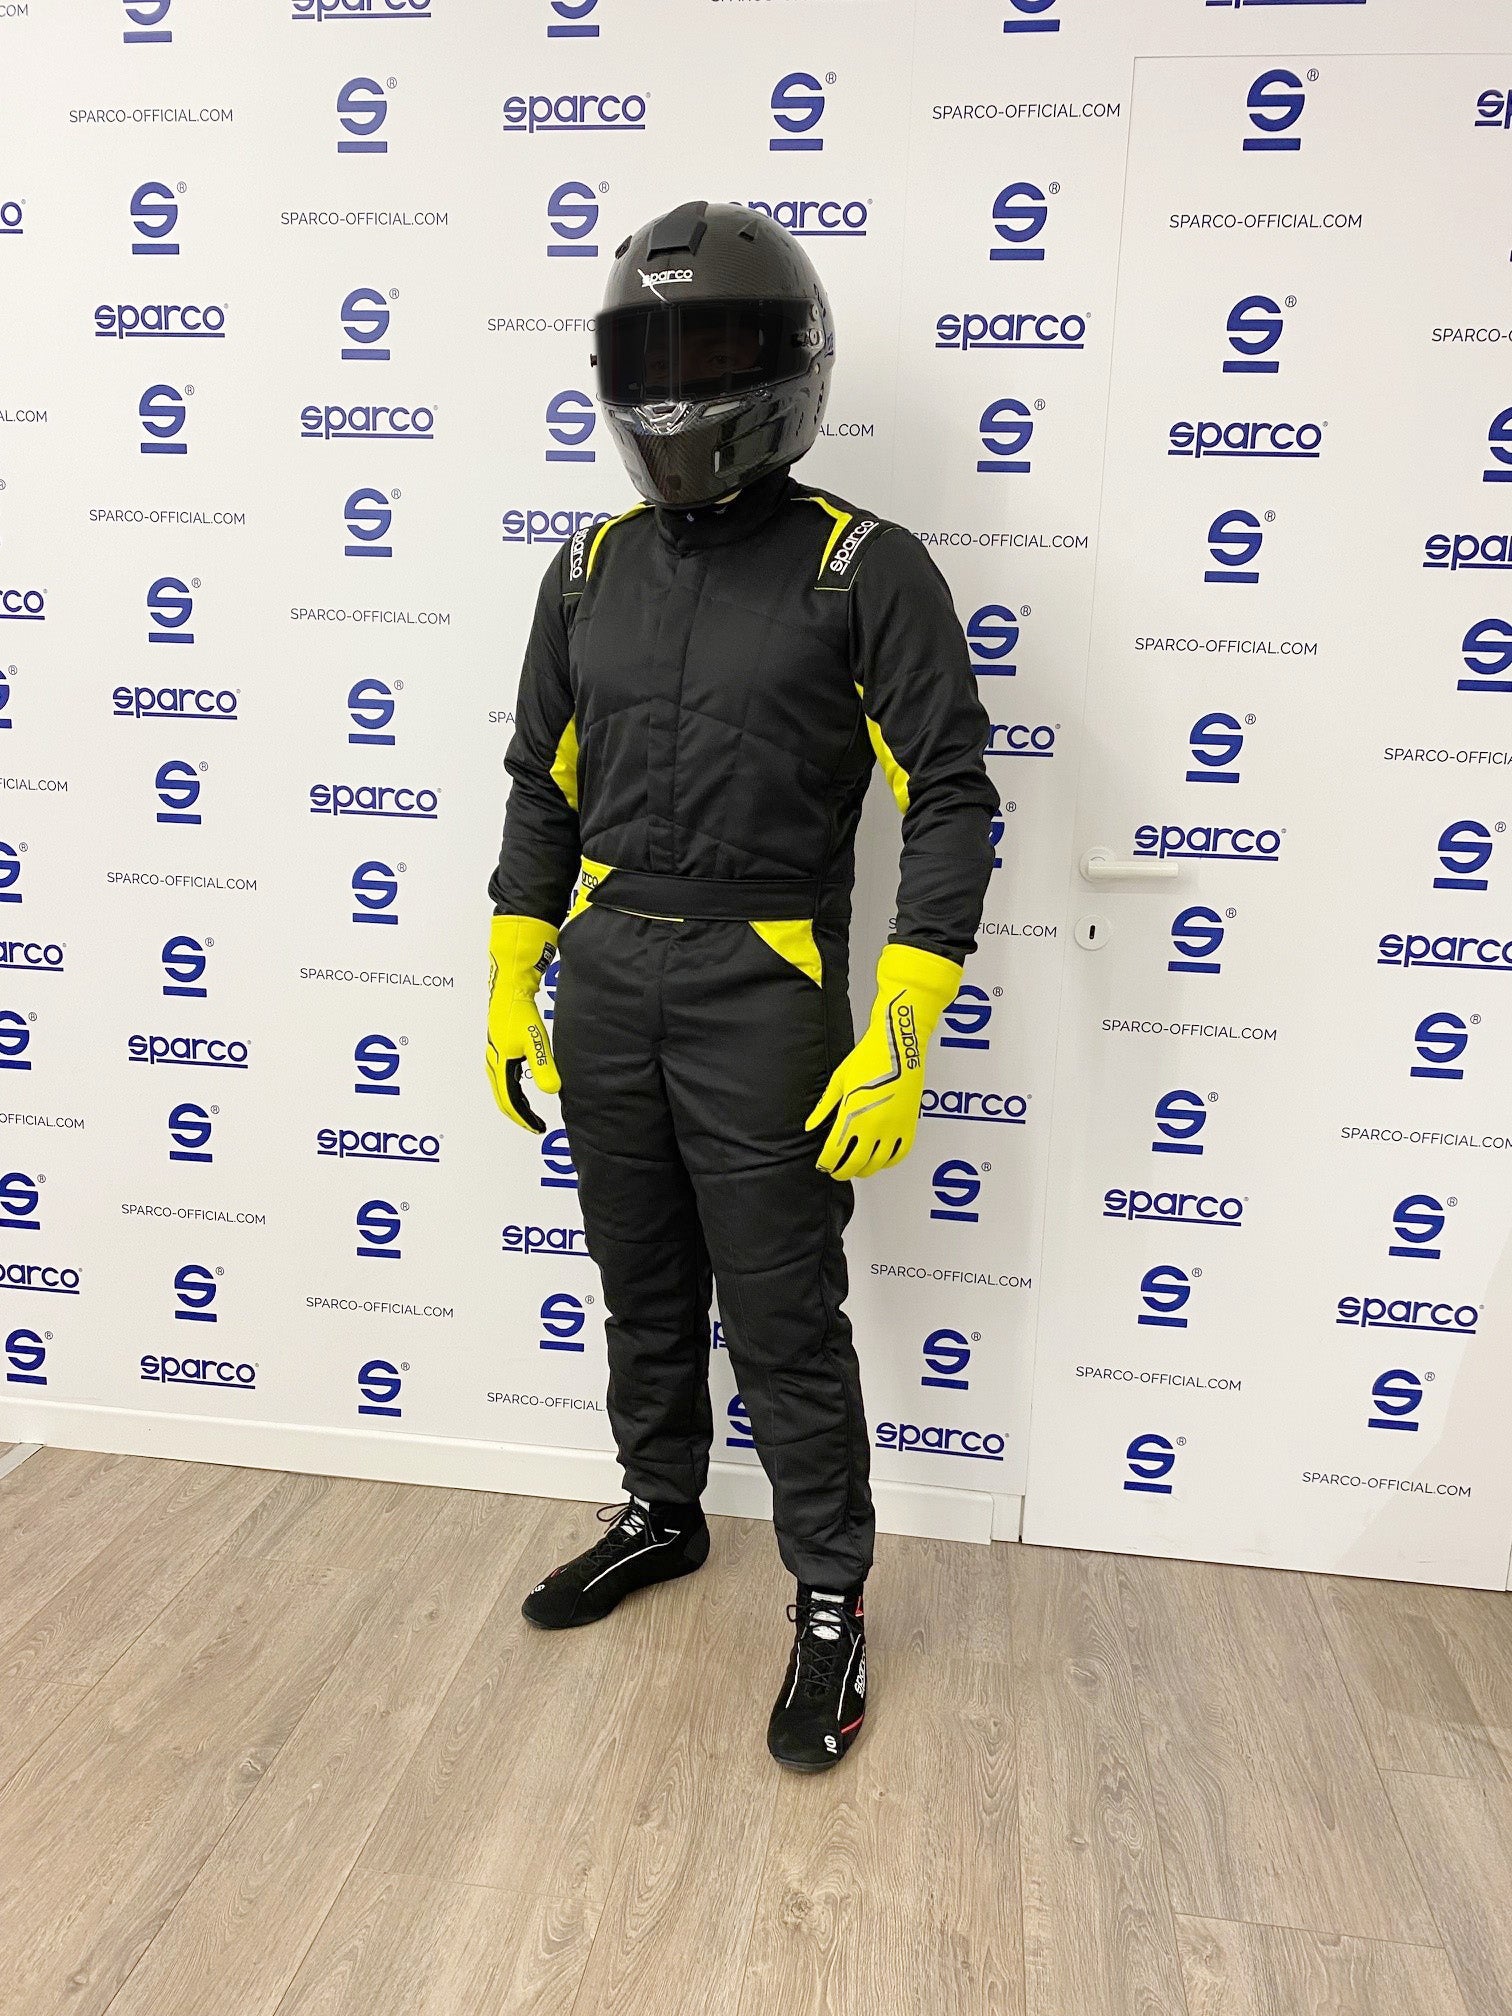 SPARCO 00109358NRGF SPRINT 2022 Racing suit, FIA 8856-2018, black/yellow, size 58 Photo-1 